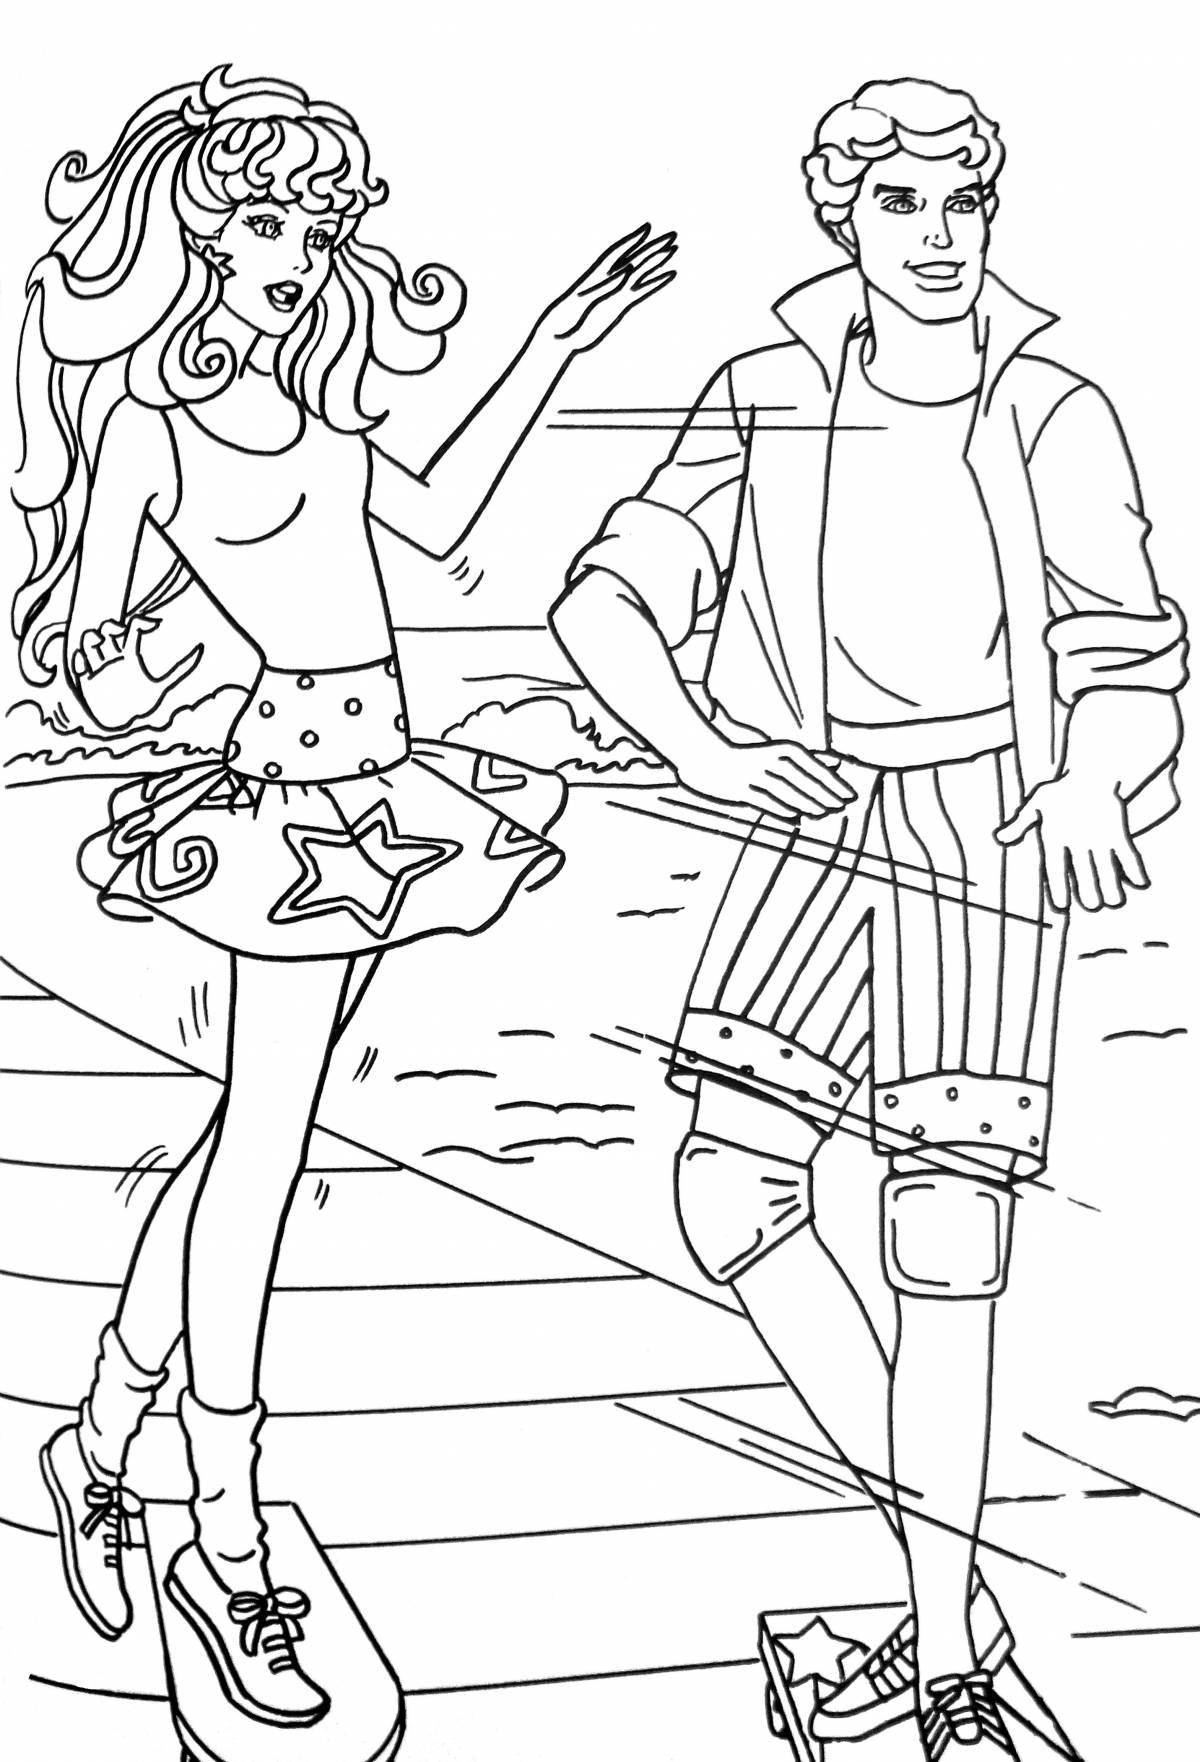 Gorgeous 90s barbie coloring book